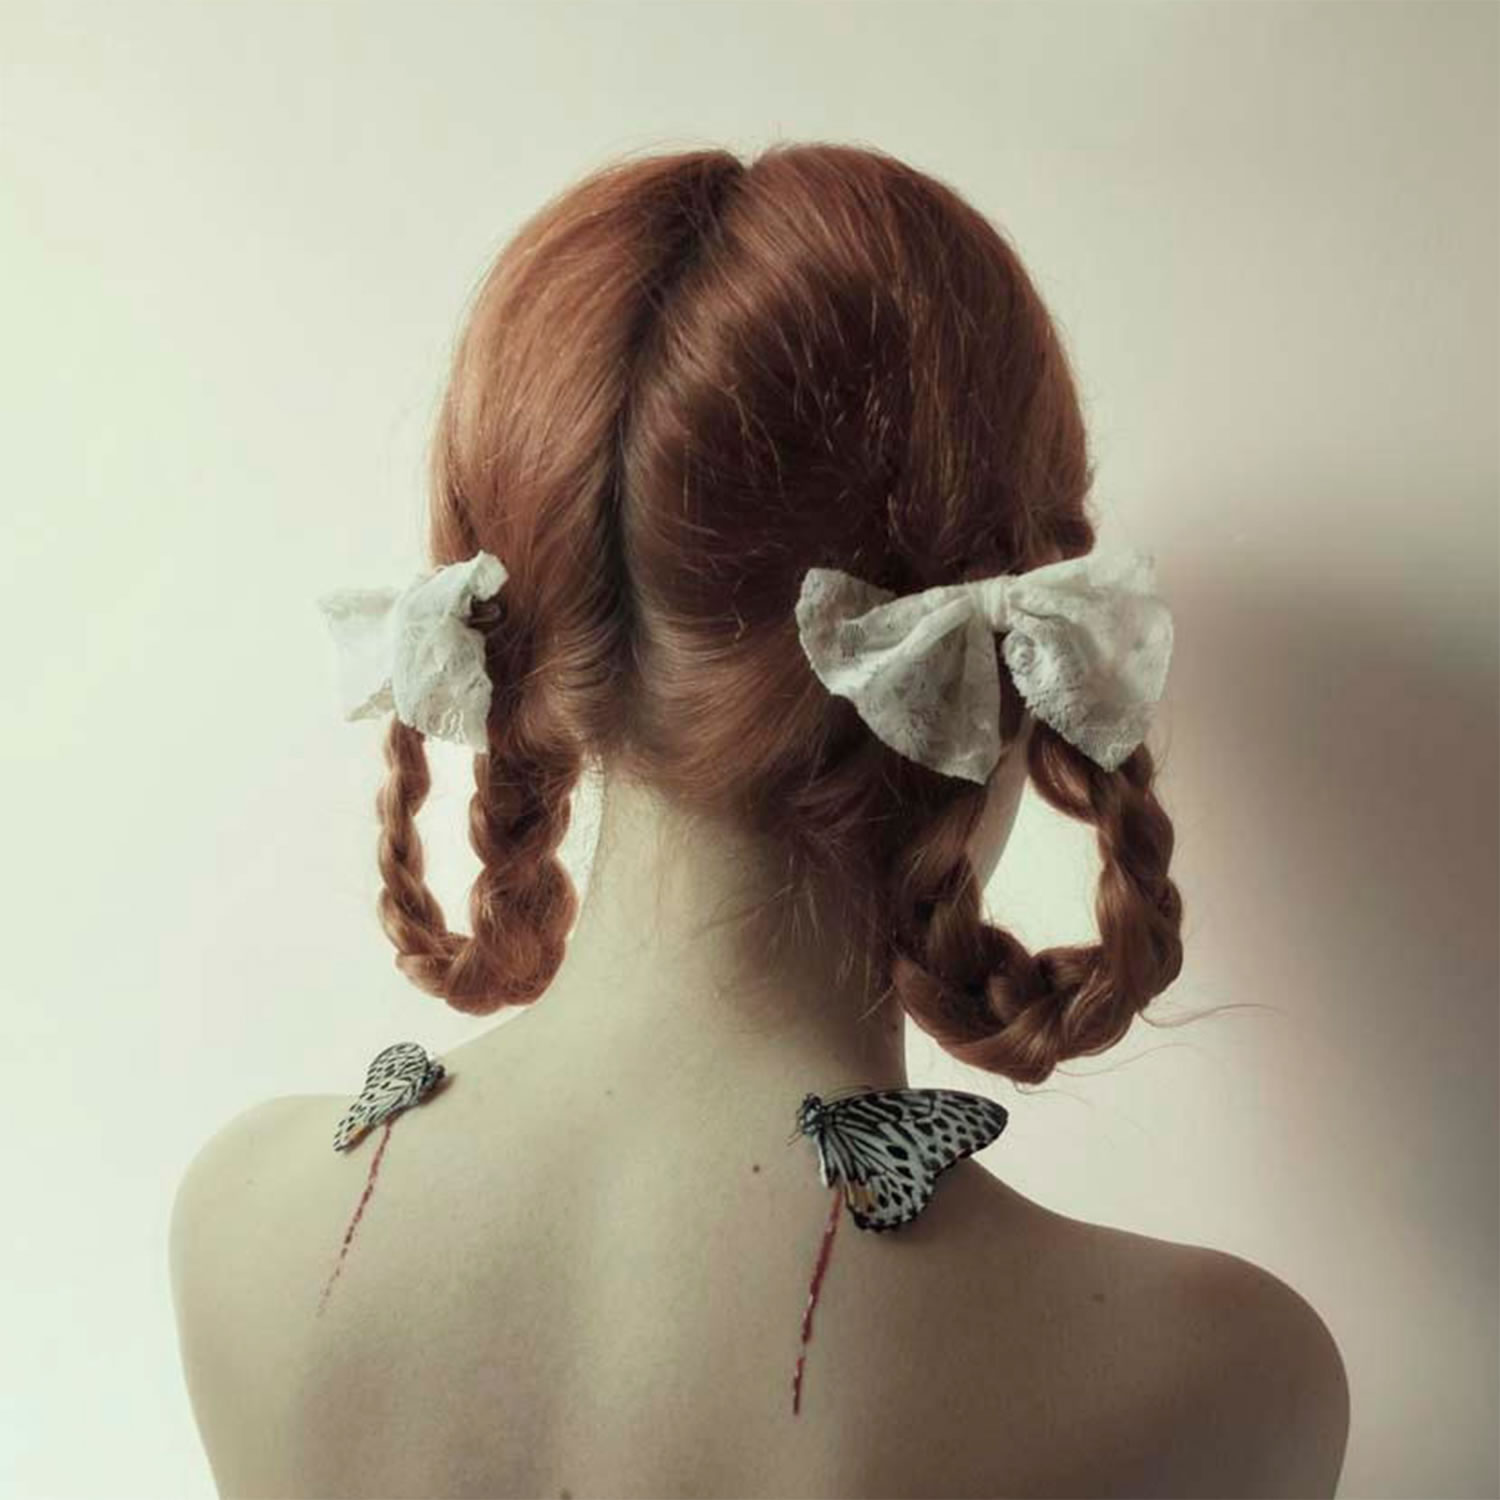 girl with bows on braided hair, butterflies on shoulders